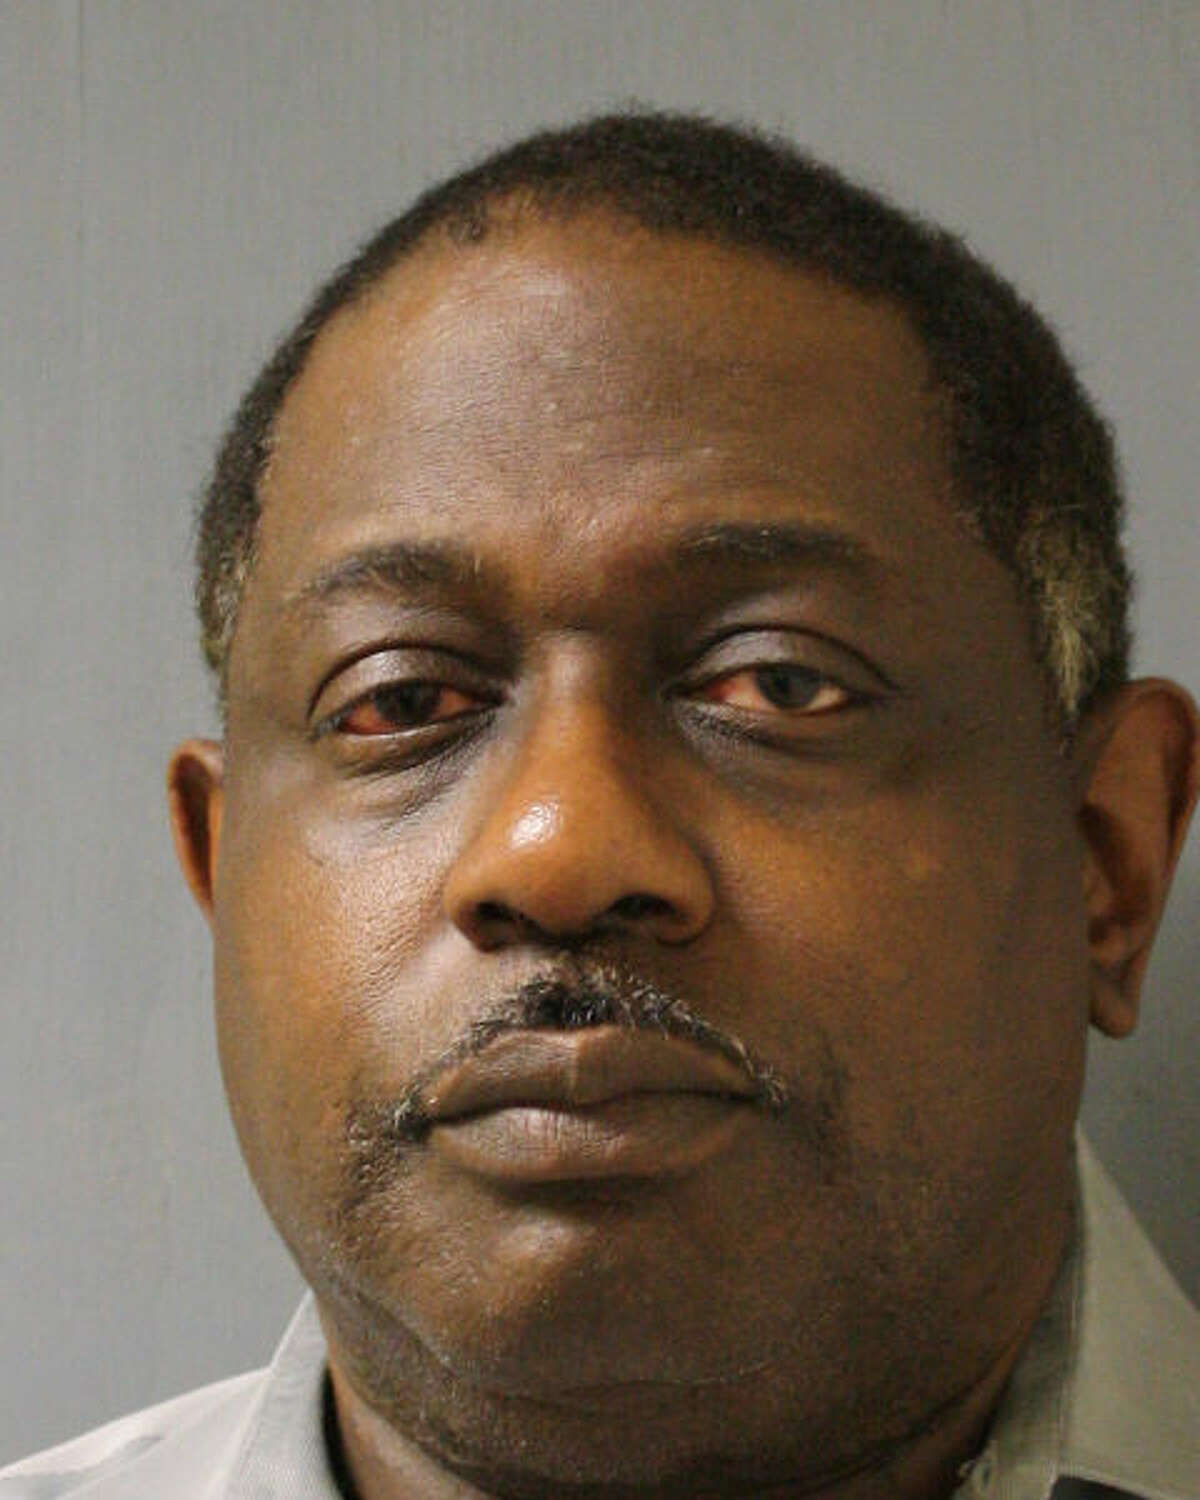 Ricky PIckens-Wilson, a Harris County Jail sergeant, is charged with a felony, tampering with government paperwork, with regard to an inmate who was locked away in filthy conditions. He has been relieved of duty. (Harris County Sheriff's Office)